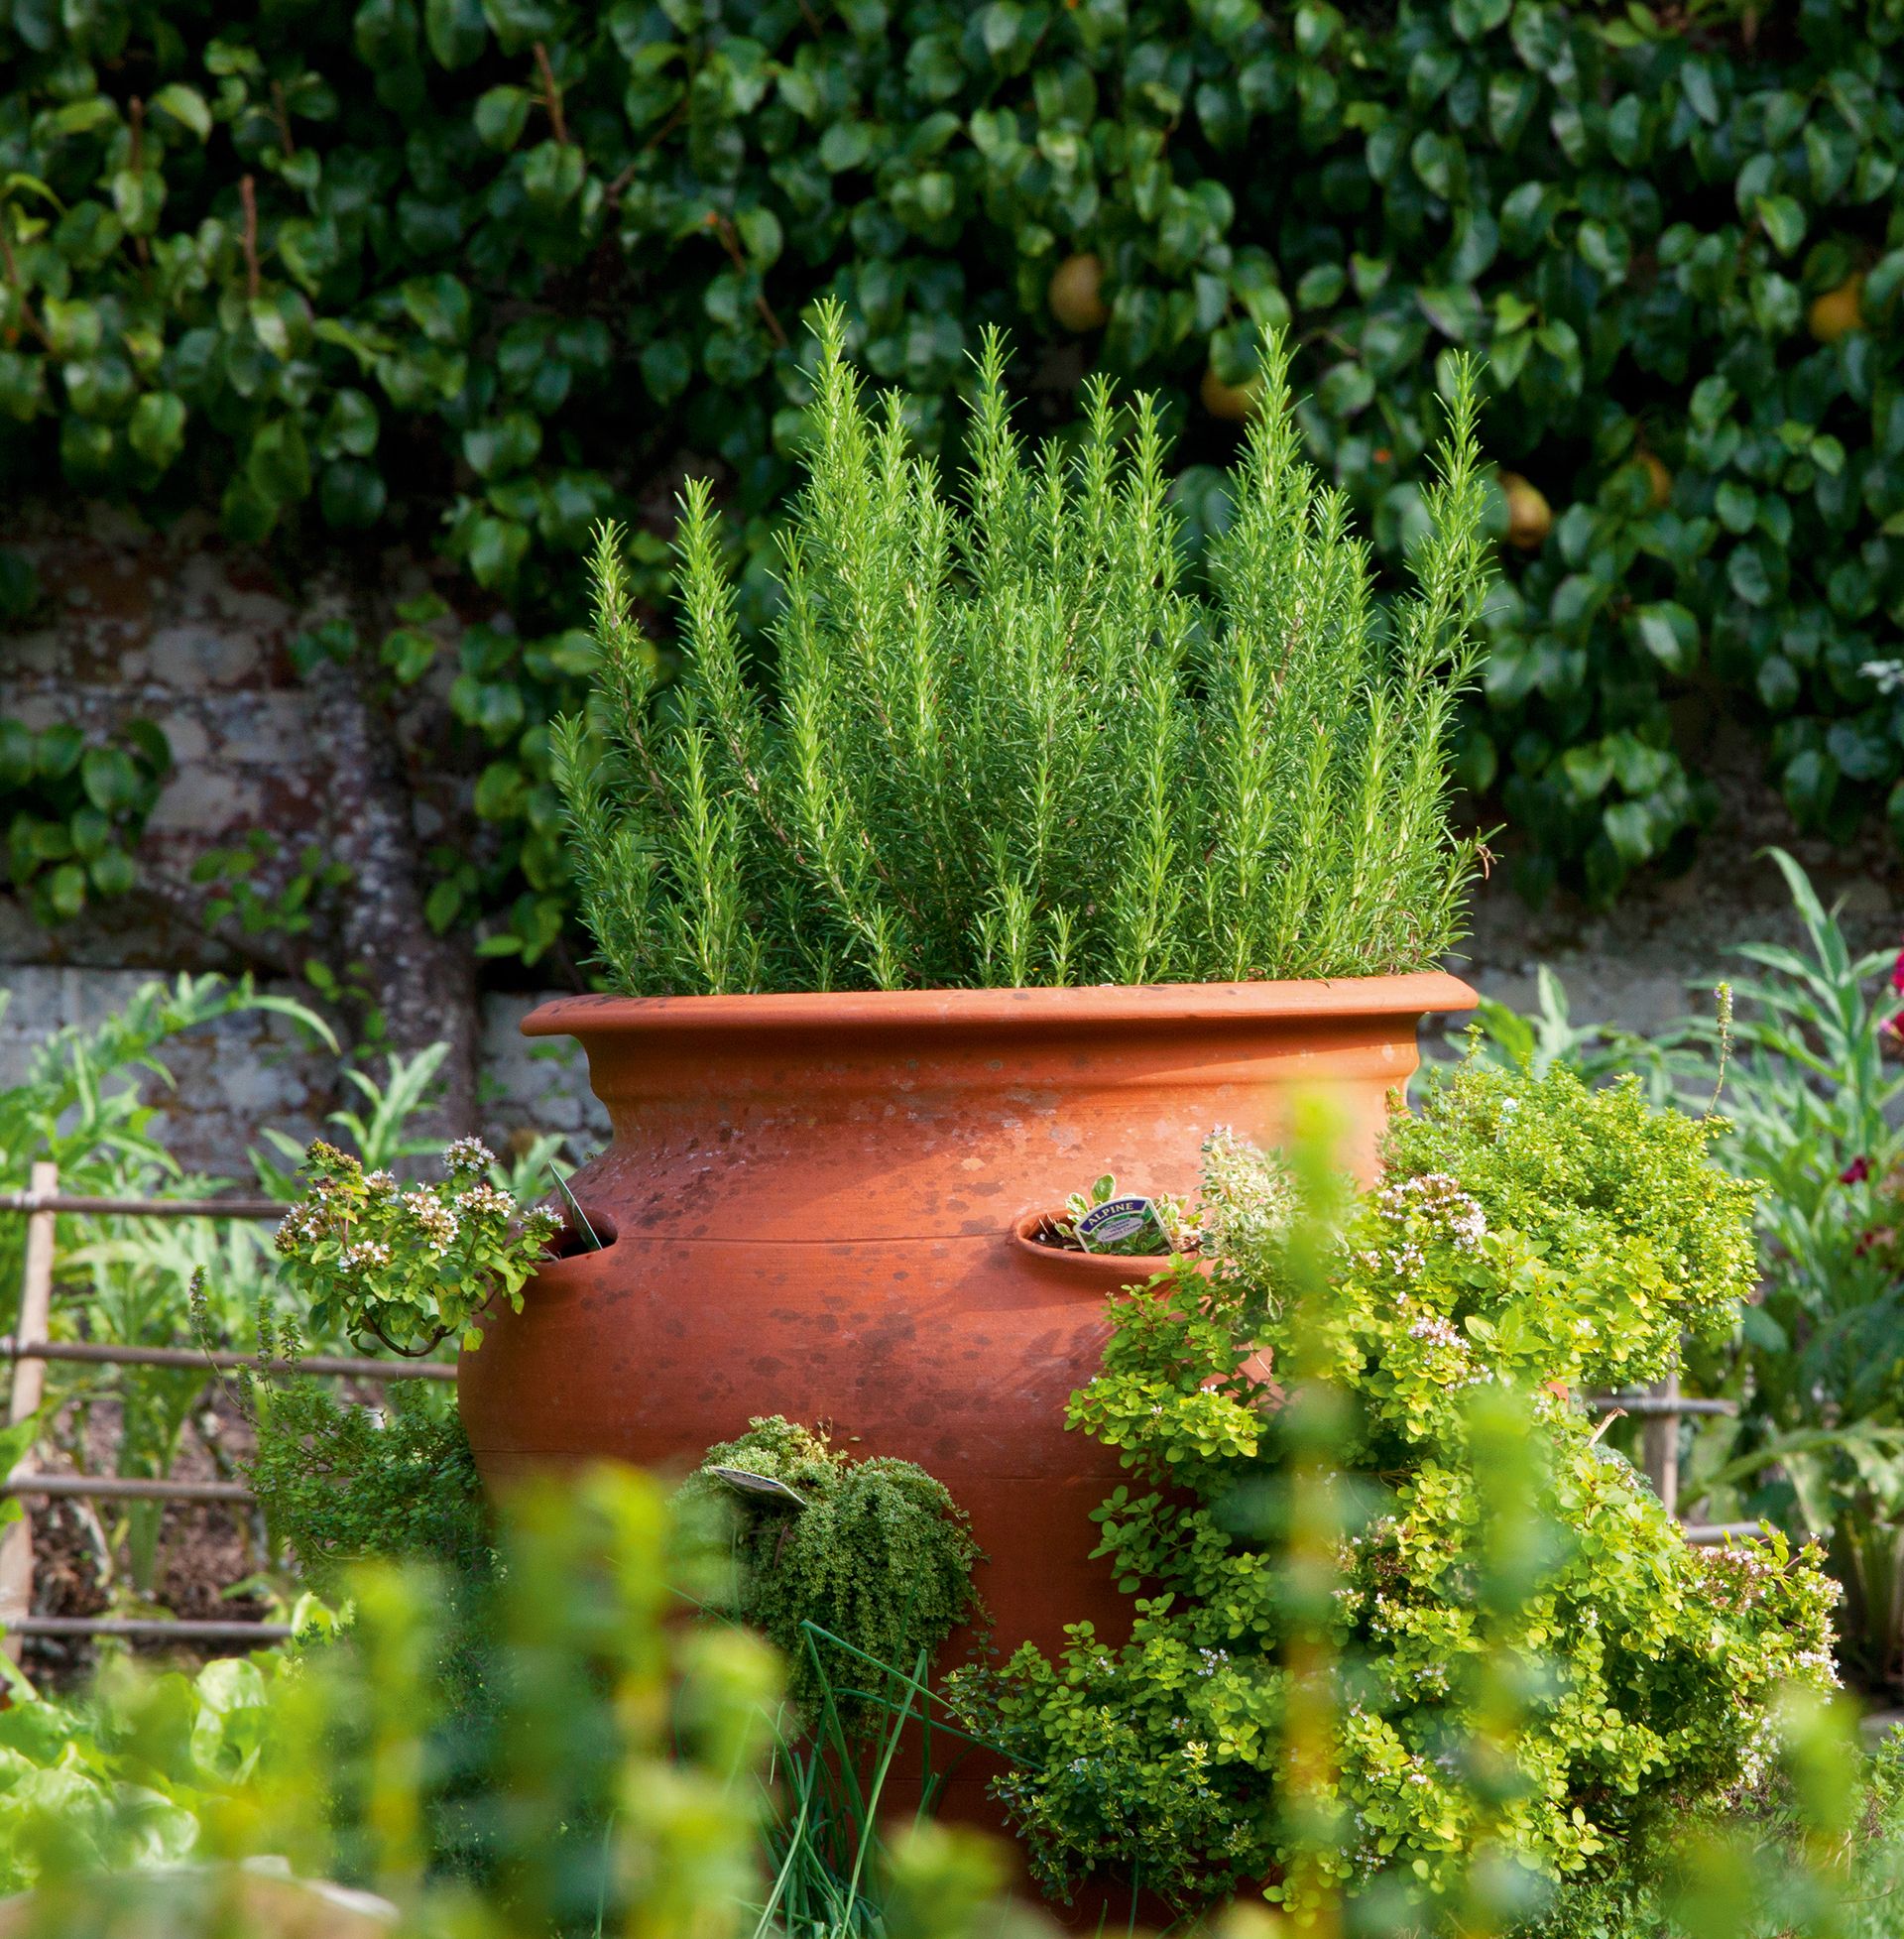 Best plants for pots all year round – 10 standout varieties